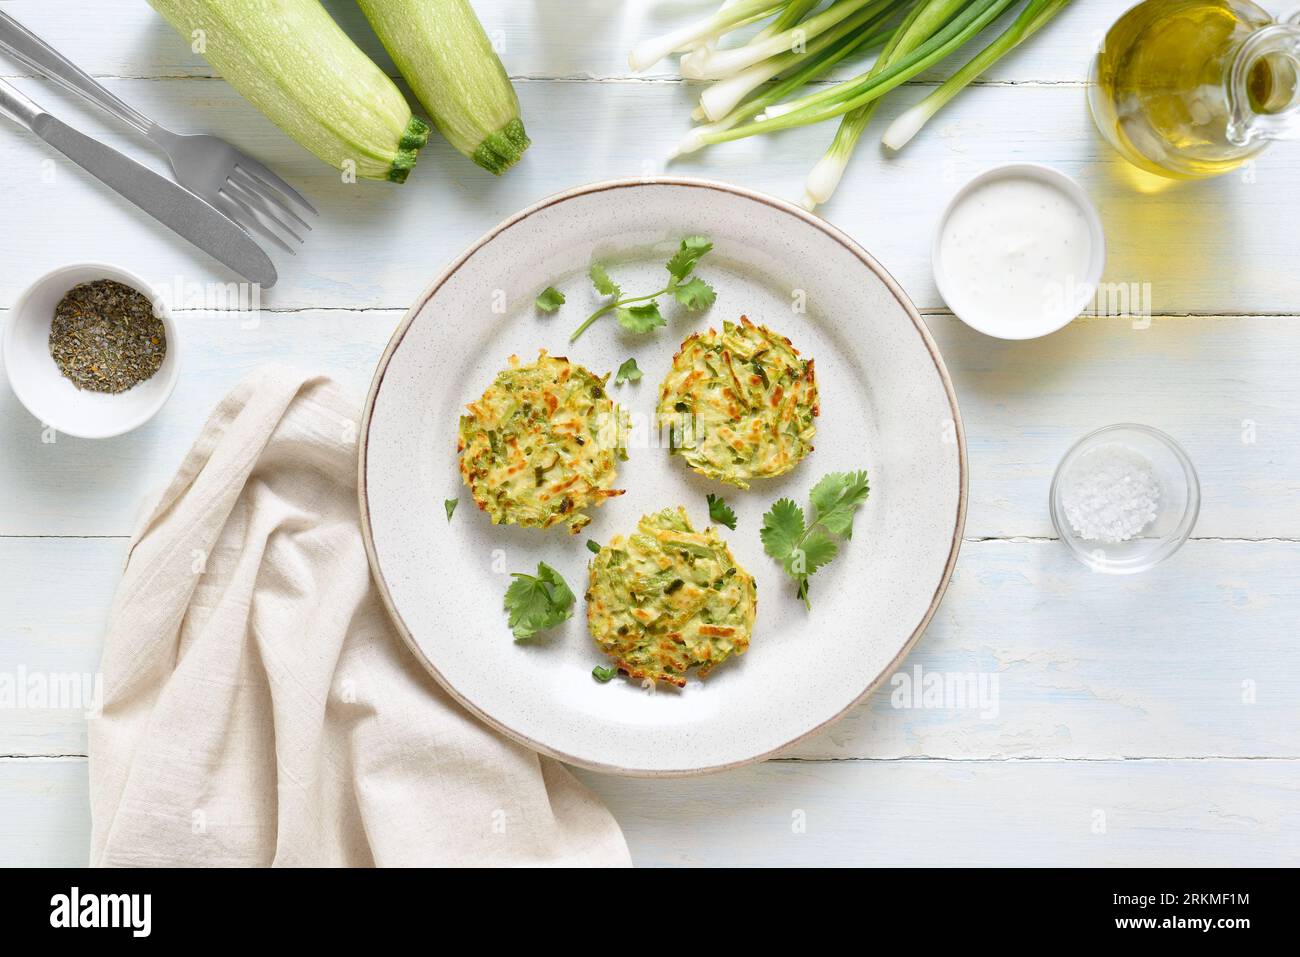 Vegetable vegetarian zucchini pancakes fritters on plate over light wooden background. Top view, flat lay Stock Photo